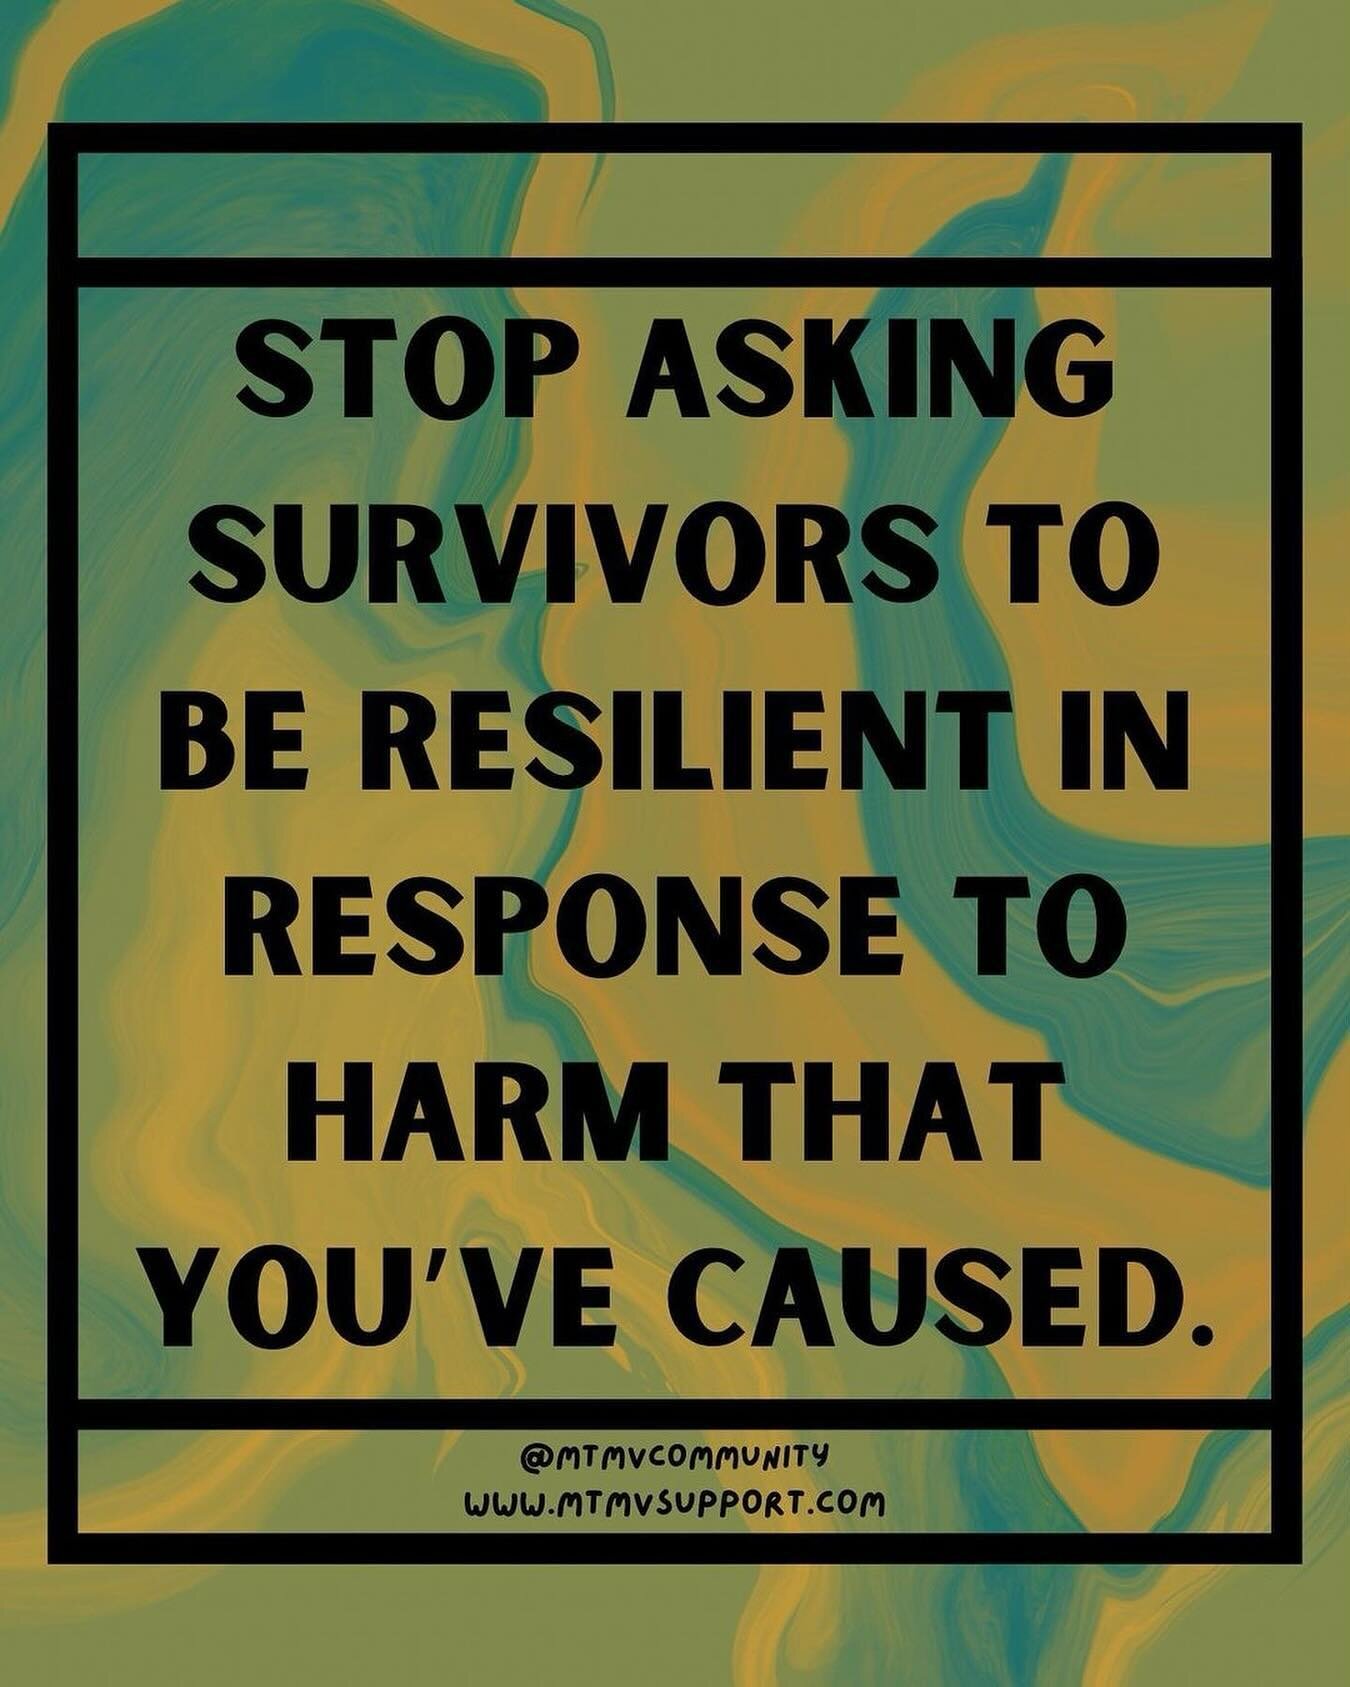 From 1-10, how exhausted are you having people applaud you for your resilience or use your own resilience as a way to escape accountability. Just because you&rsquo;re carrying it doesn&rsquo;t mean you should have to. 

[Image description: Green marb